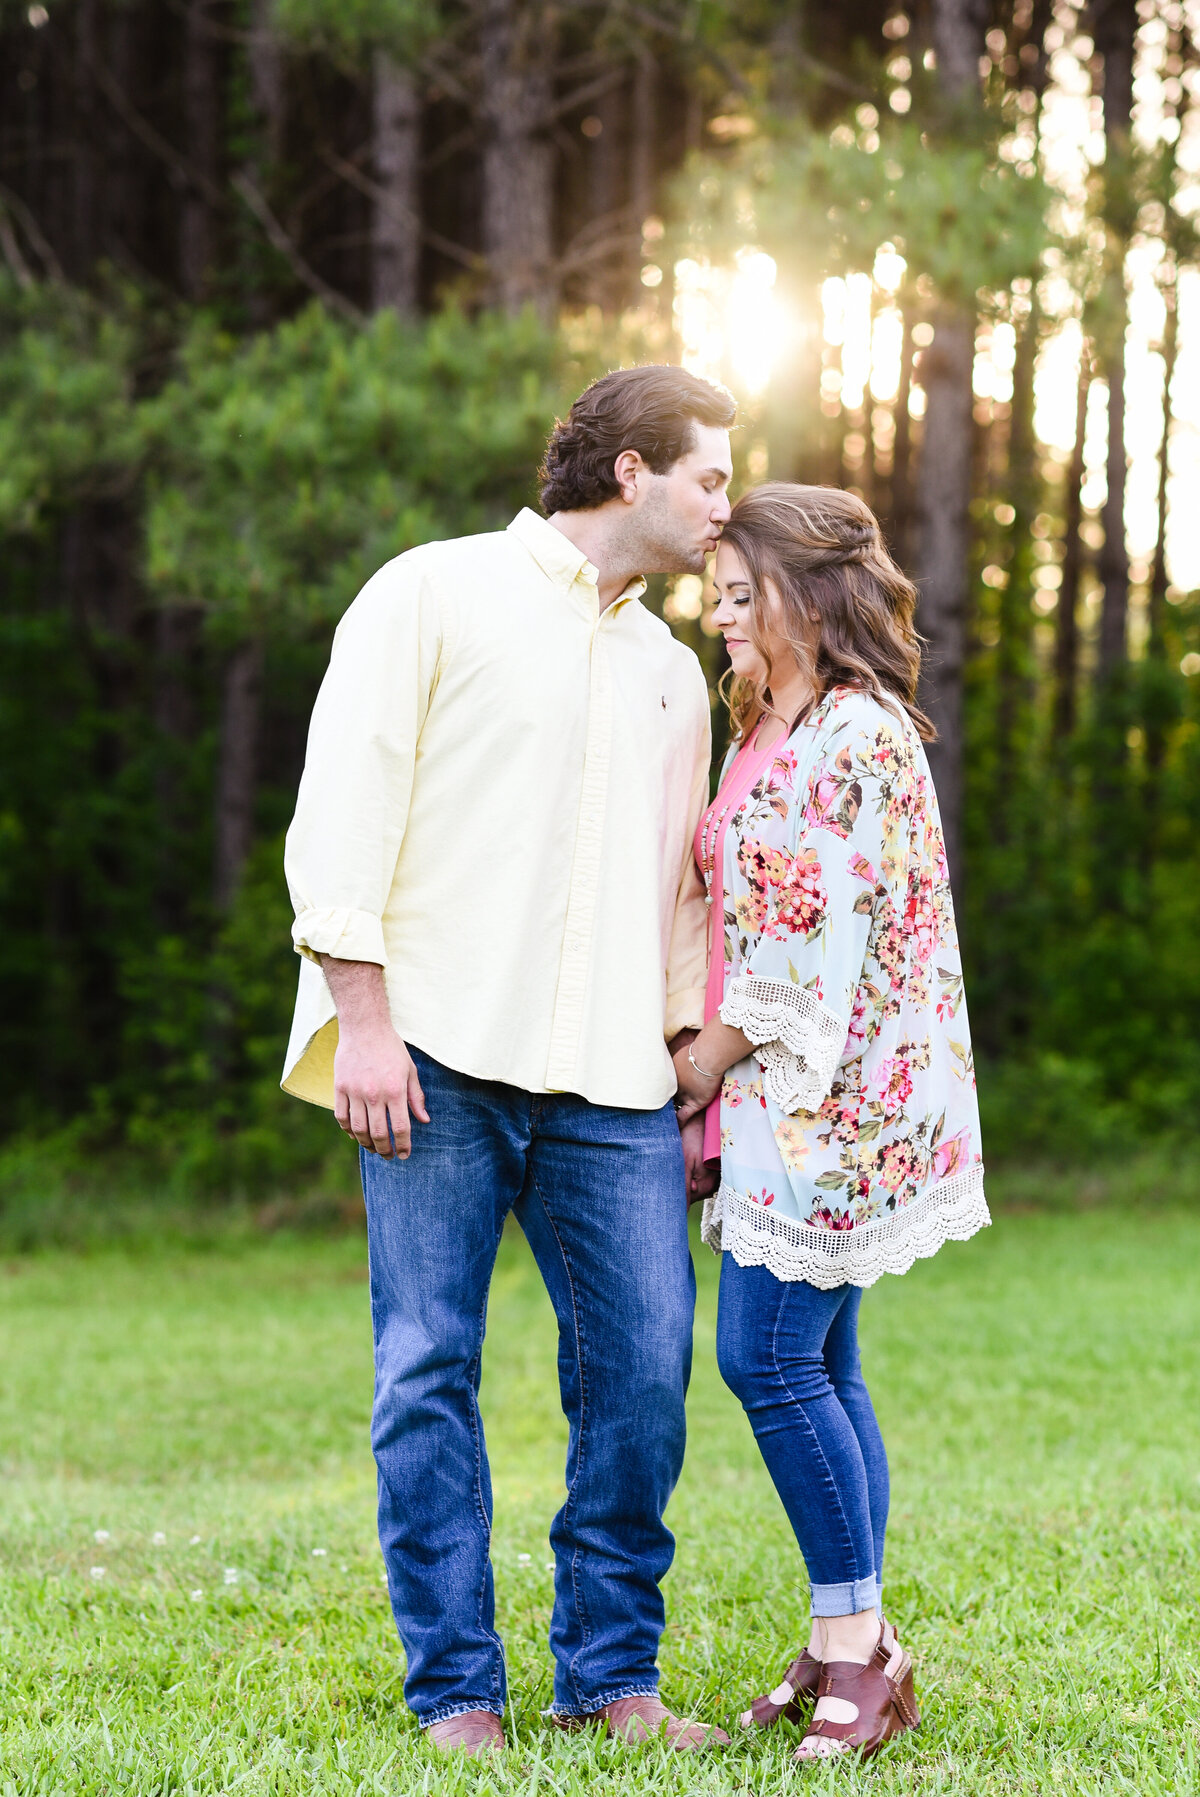 Beautiful Mississippi Engagement Photography: groom kisses bride in forest at sunset in Mississippi